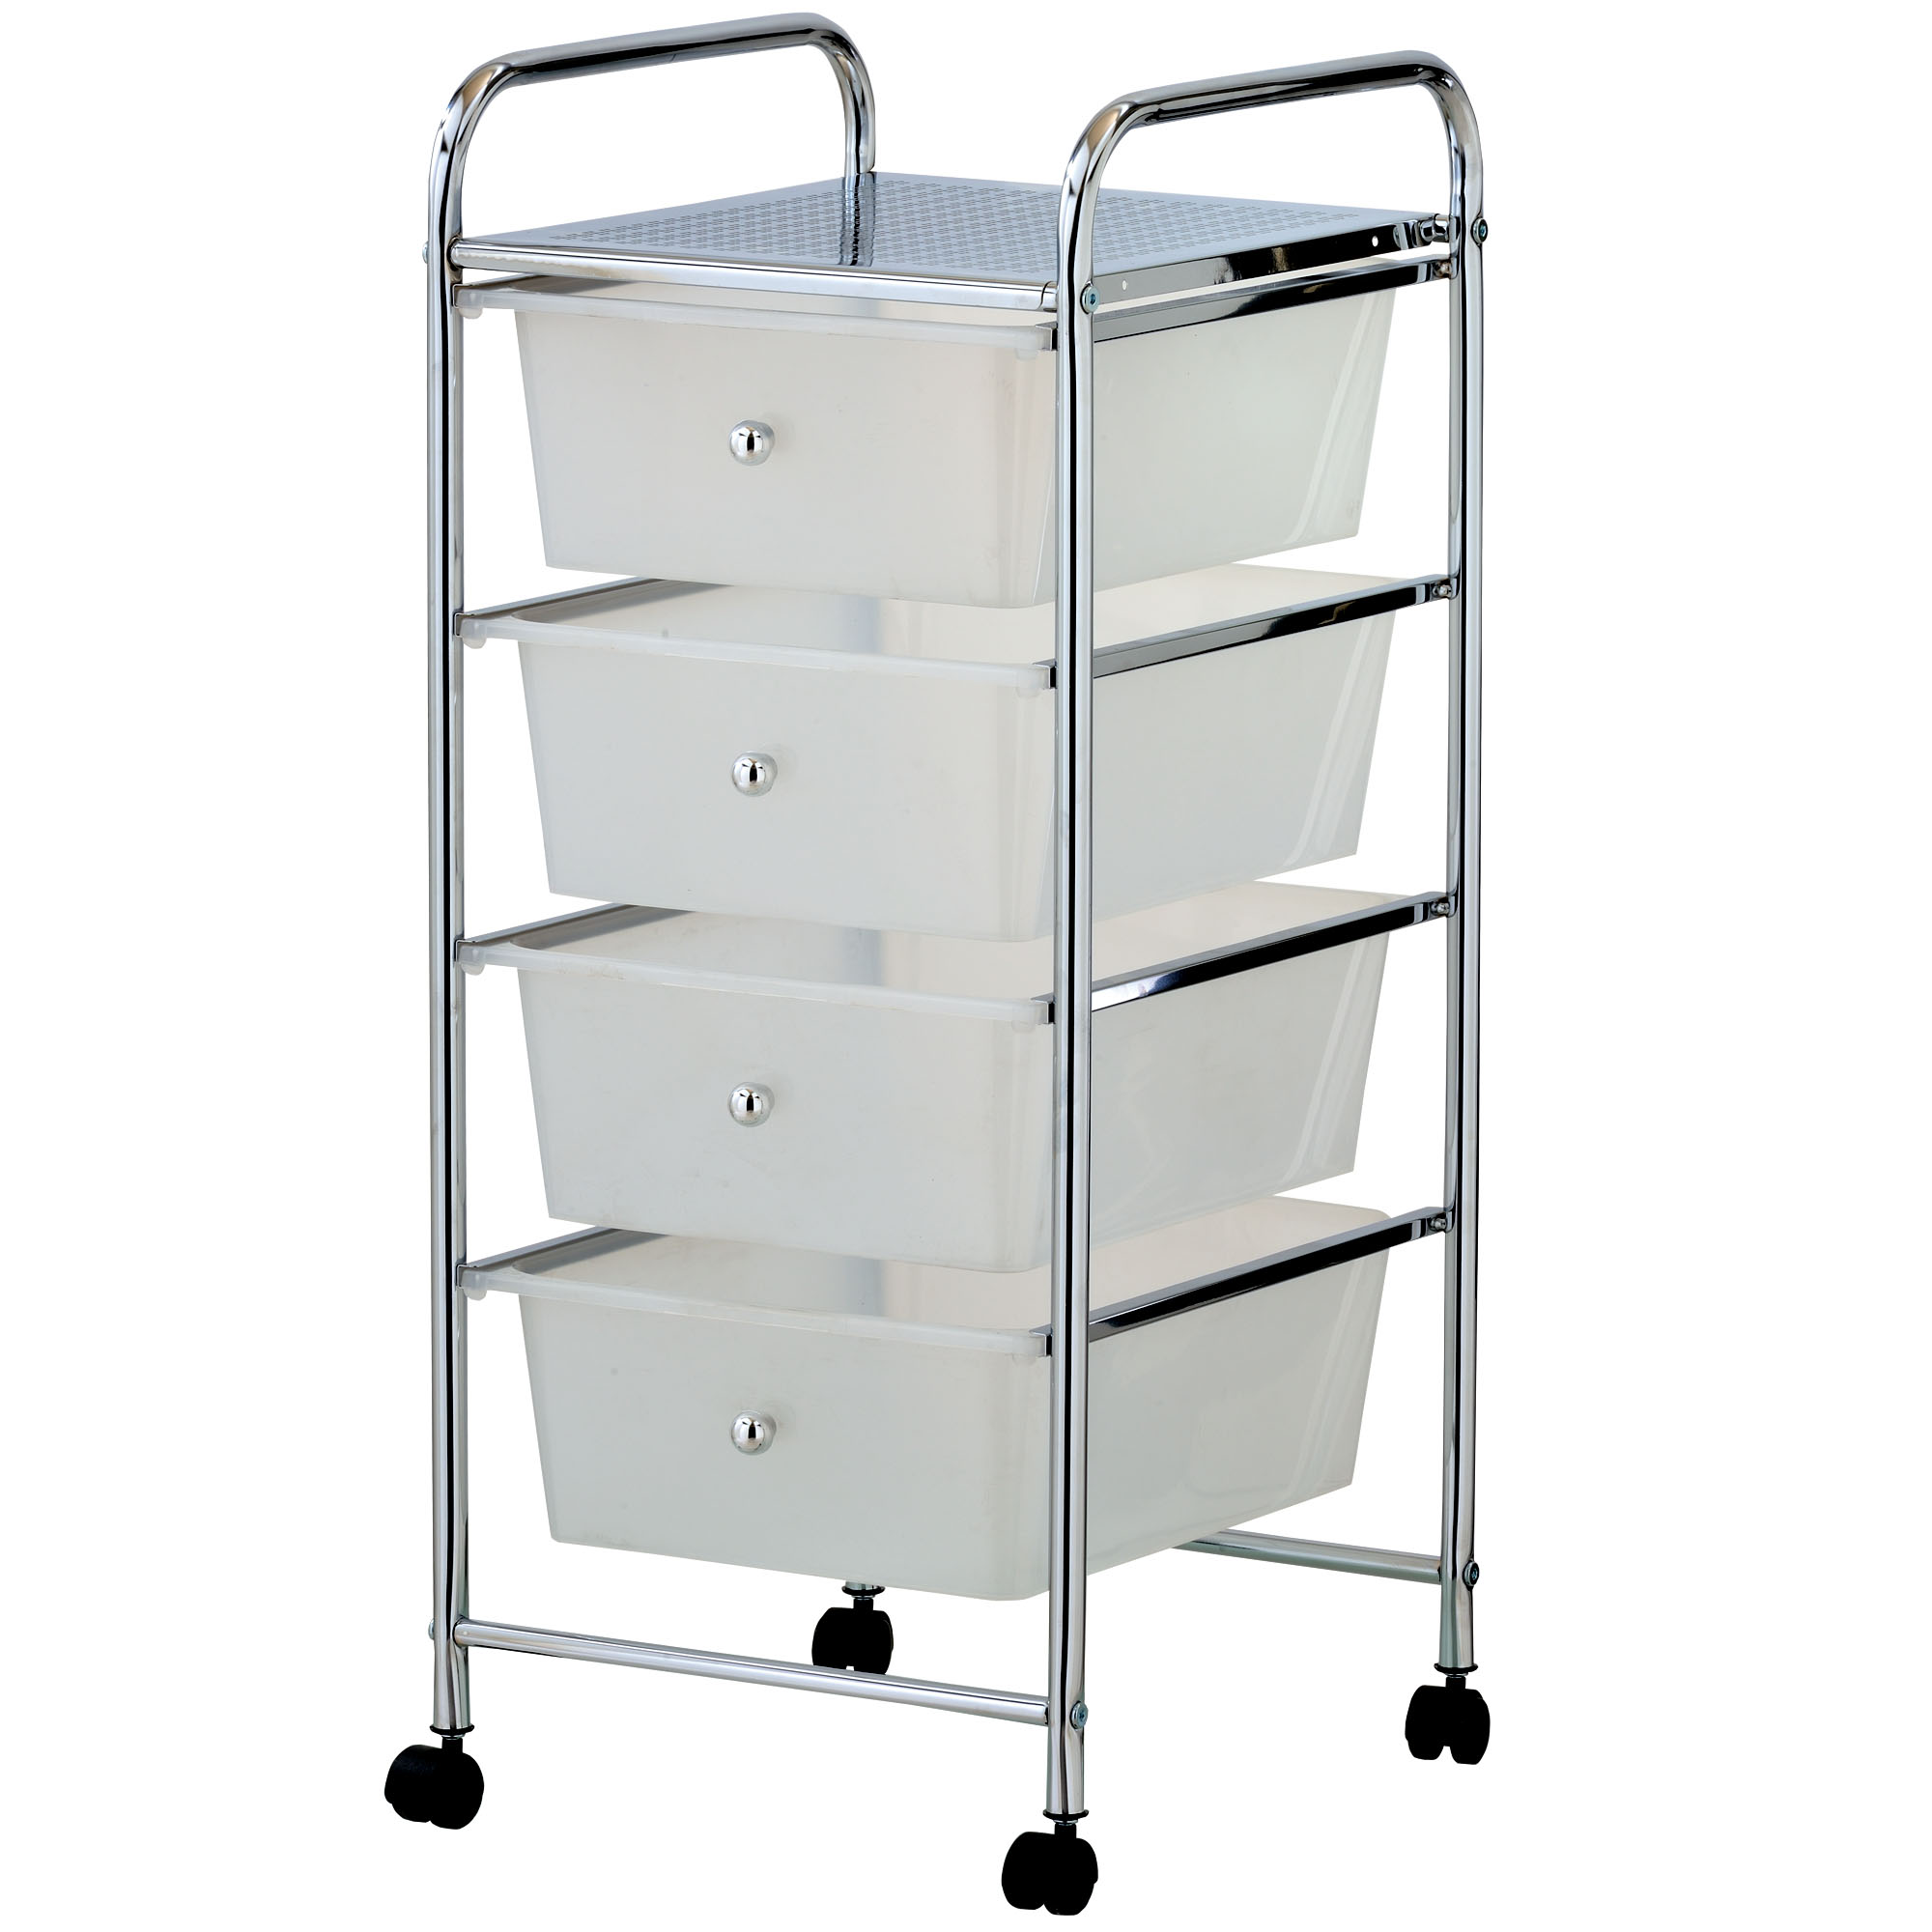 VonHaus 4 Drawer Mobile Storage Trolley for Home Office or ...